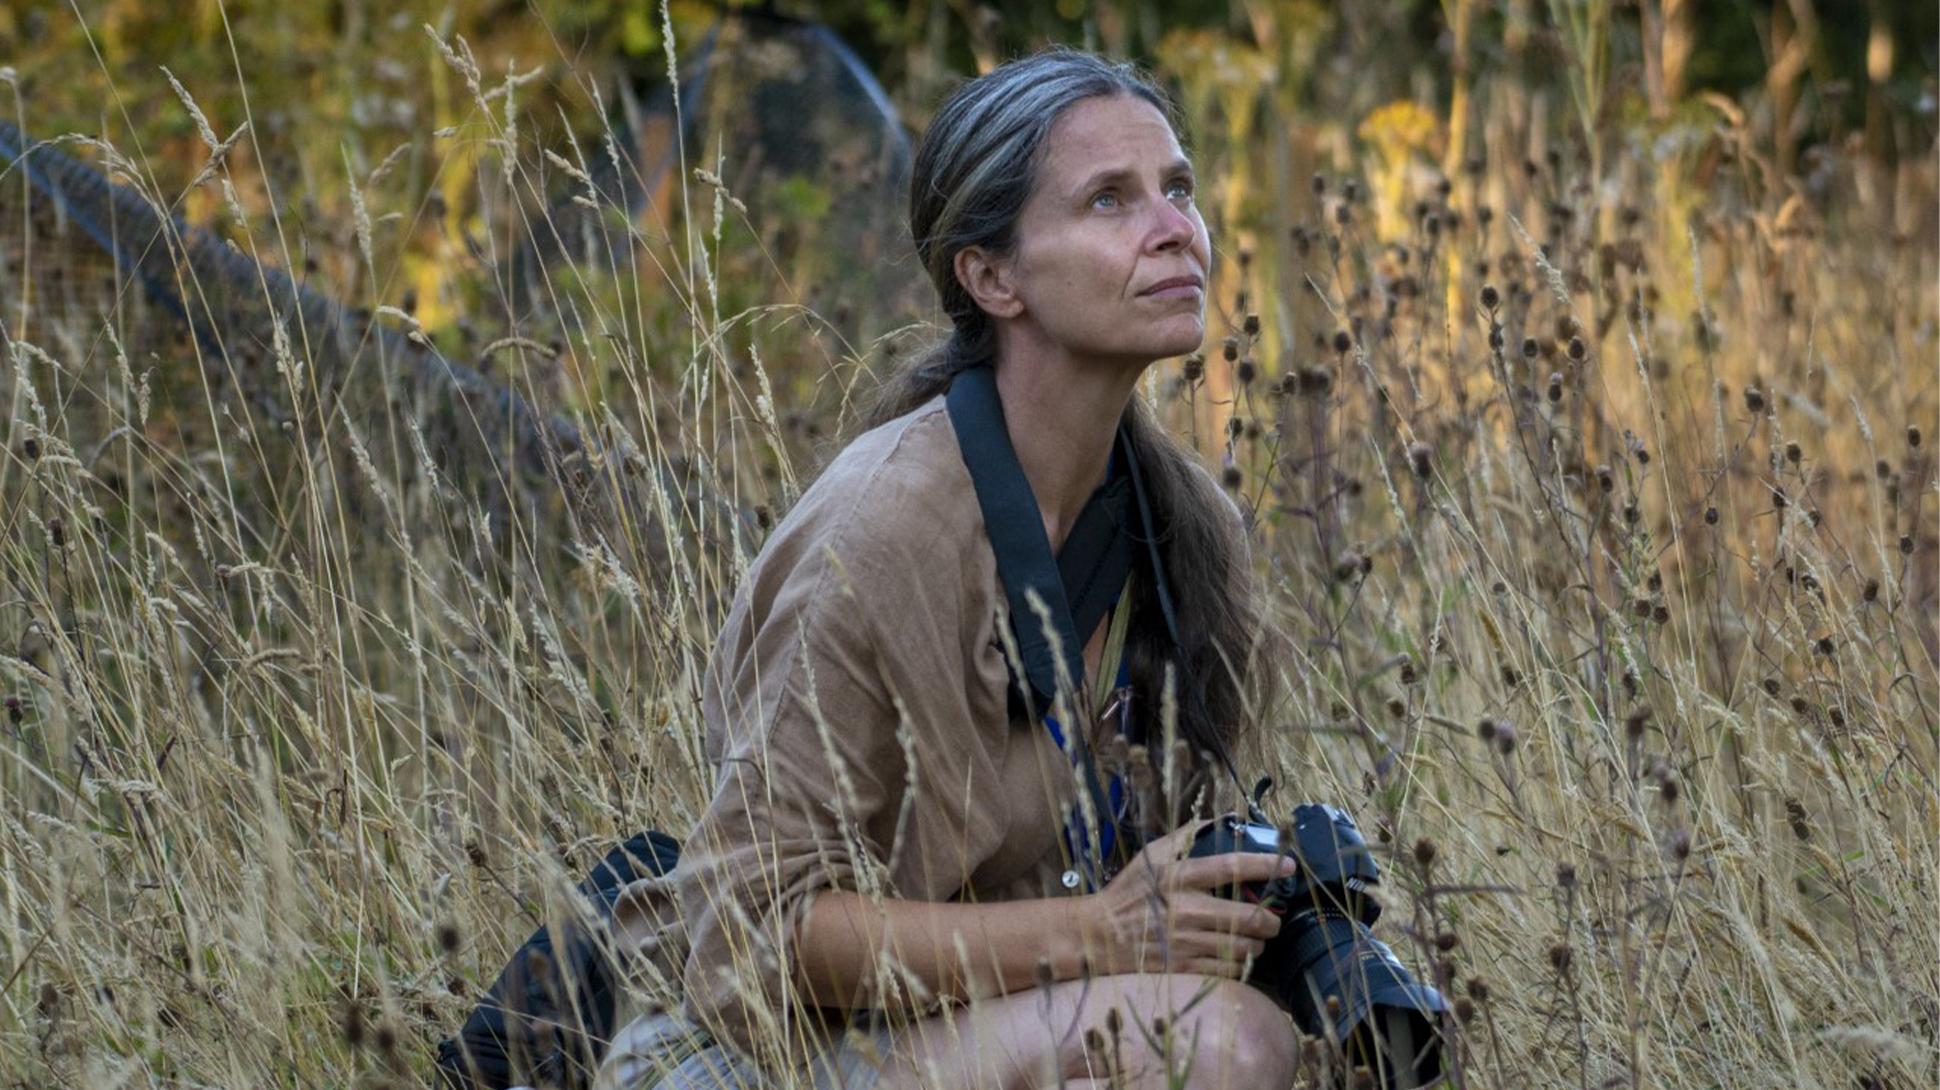 A women is sitting on the ground surrounded by grasses, she is holding a camera and looking up